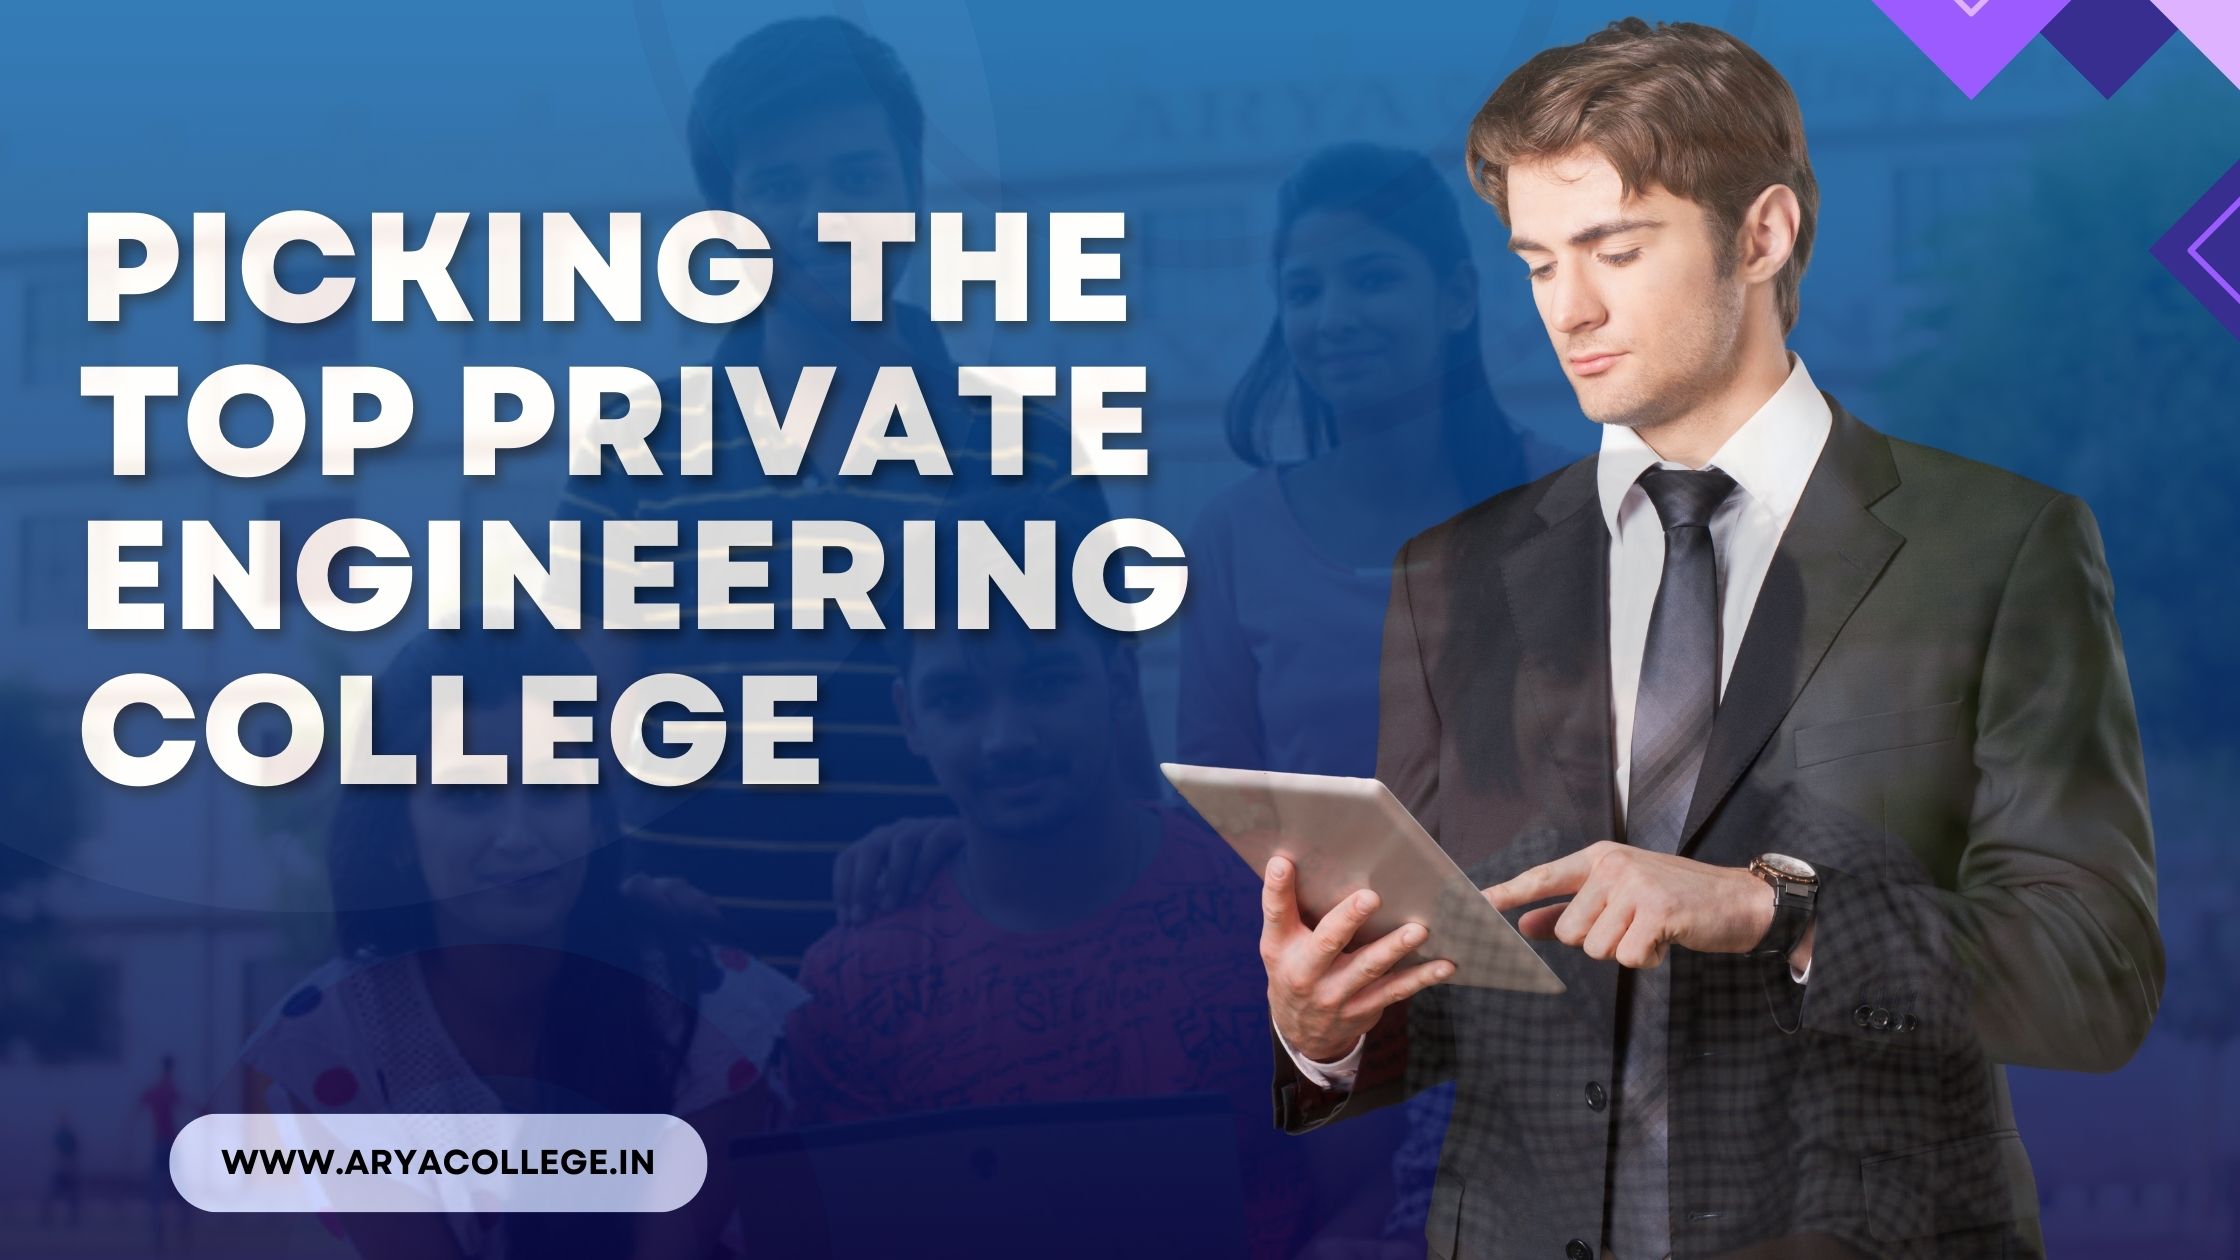 Picking the Top Private Engineering College